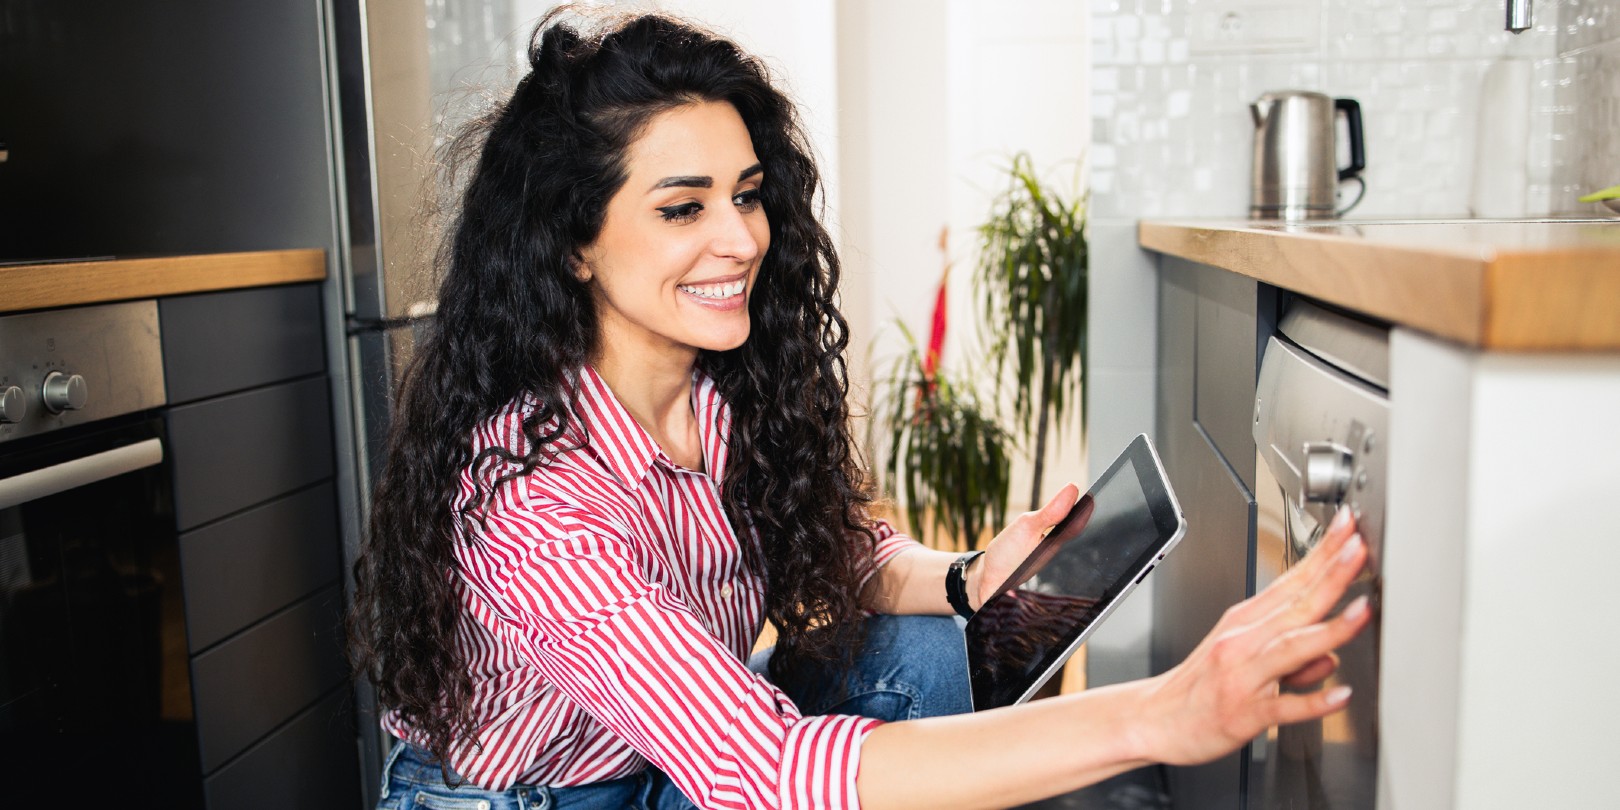 Young woman using smart home technology